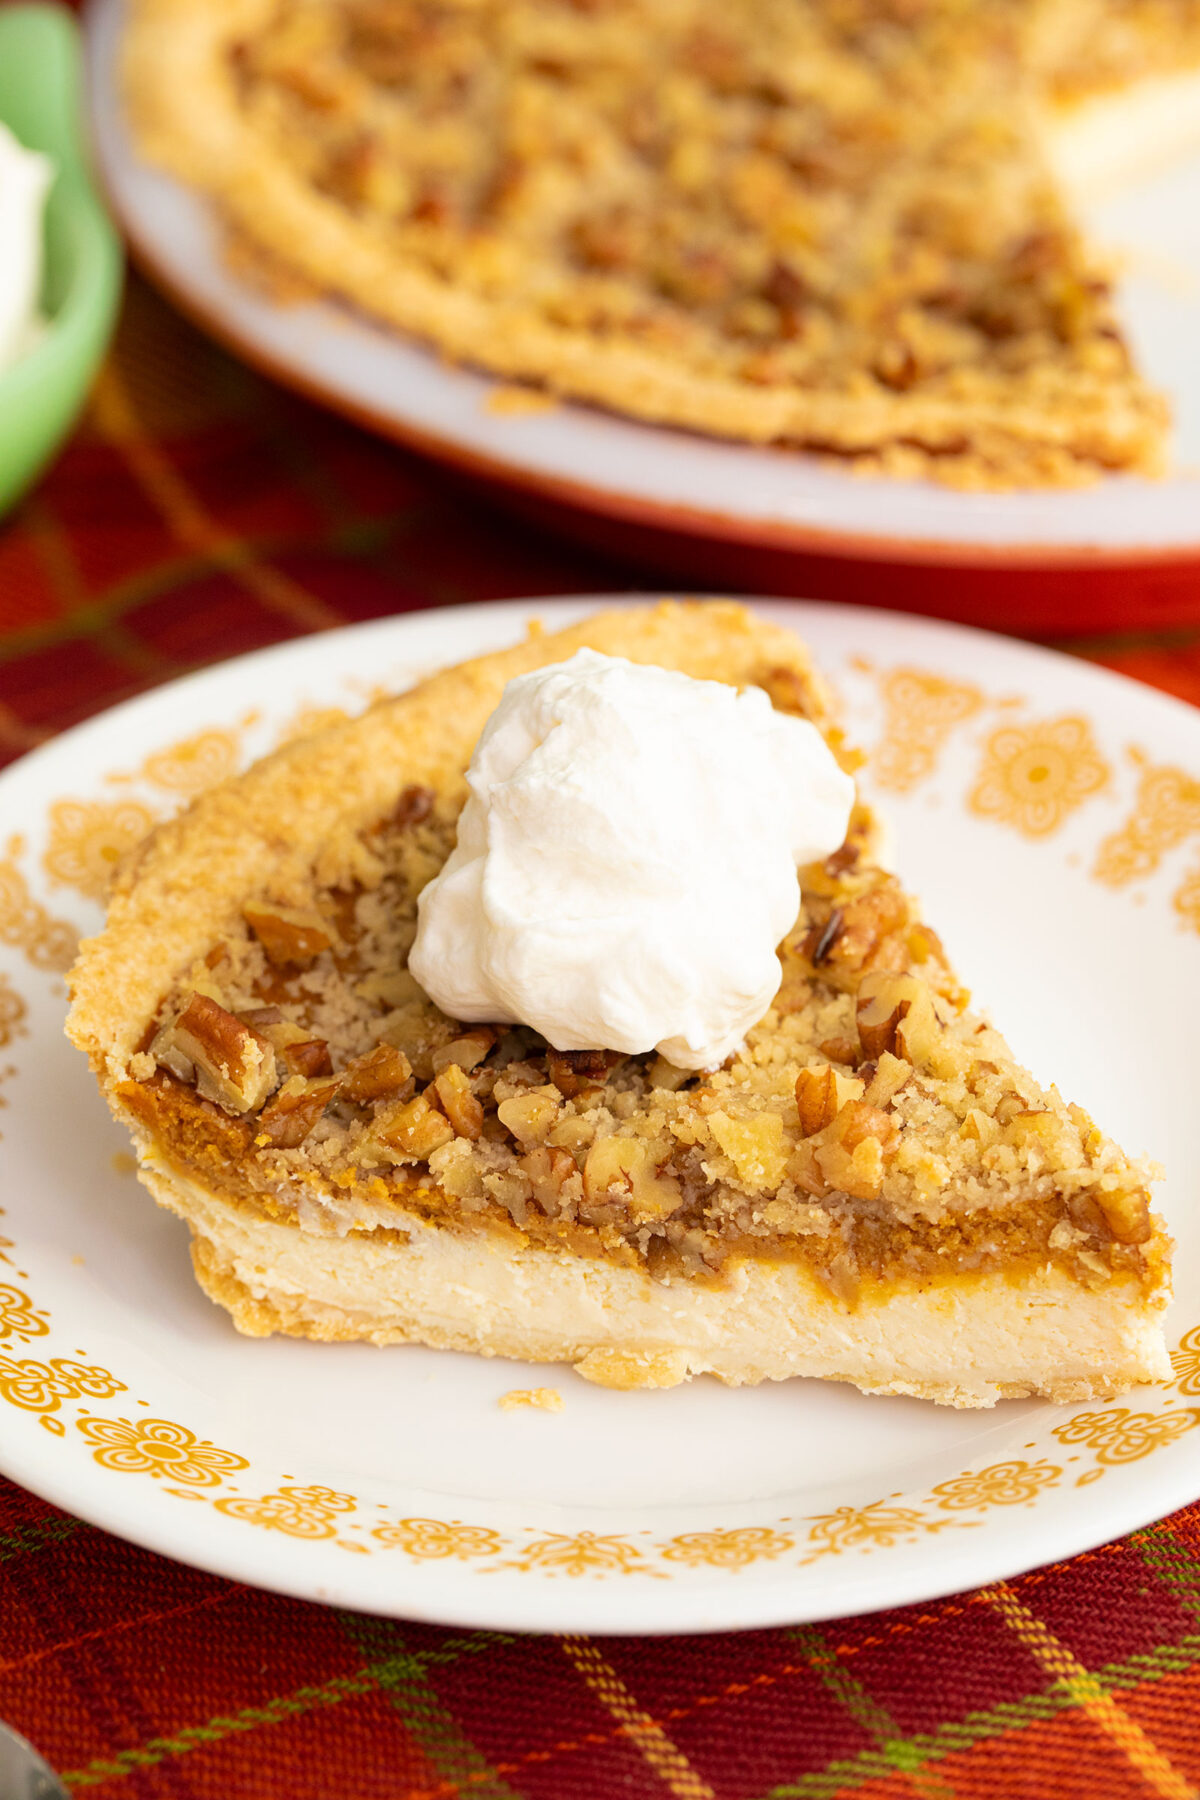 a slice of pumpkin paradise pie on a white plate with a dollop of whipped topping.